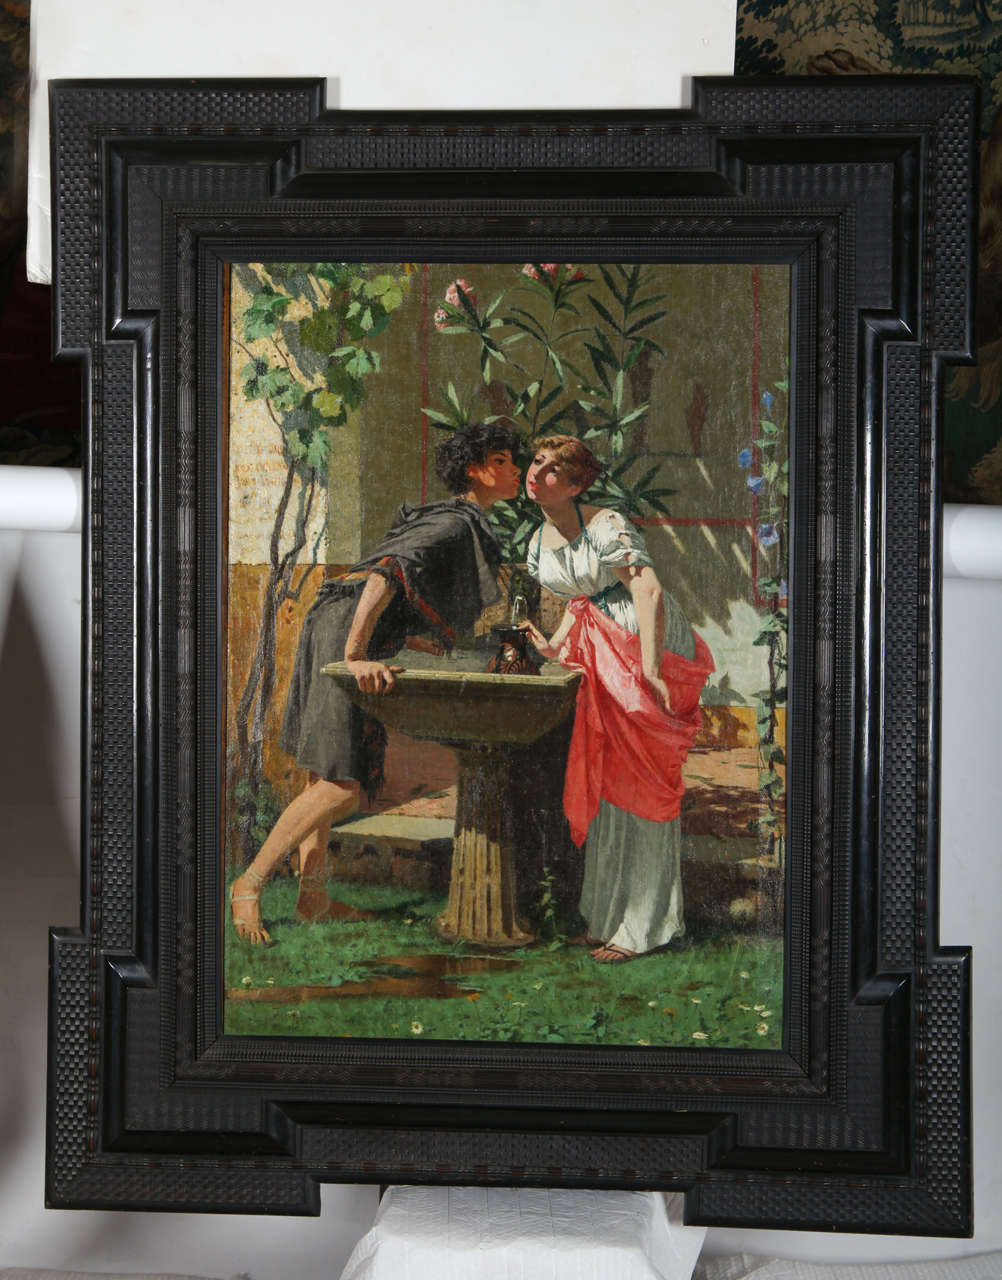 Lovers by a fountain, painting oil on canvas, 
Signed left sight.

Measures: cm 70 x 100 frame 118 x 145

Faustini Modesto. Brescia, 27 maggio 1839 - Roma, 23 marzo 1891.
Born in Brescia in 1839, Modesto Faustini was orphaned at the age of six